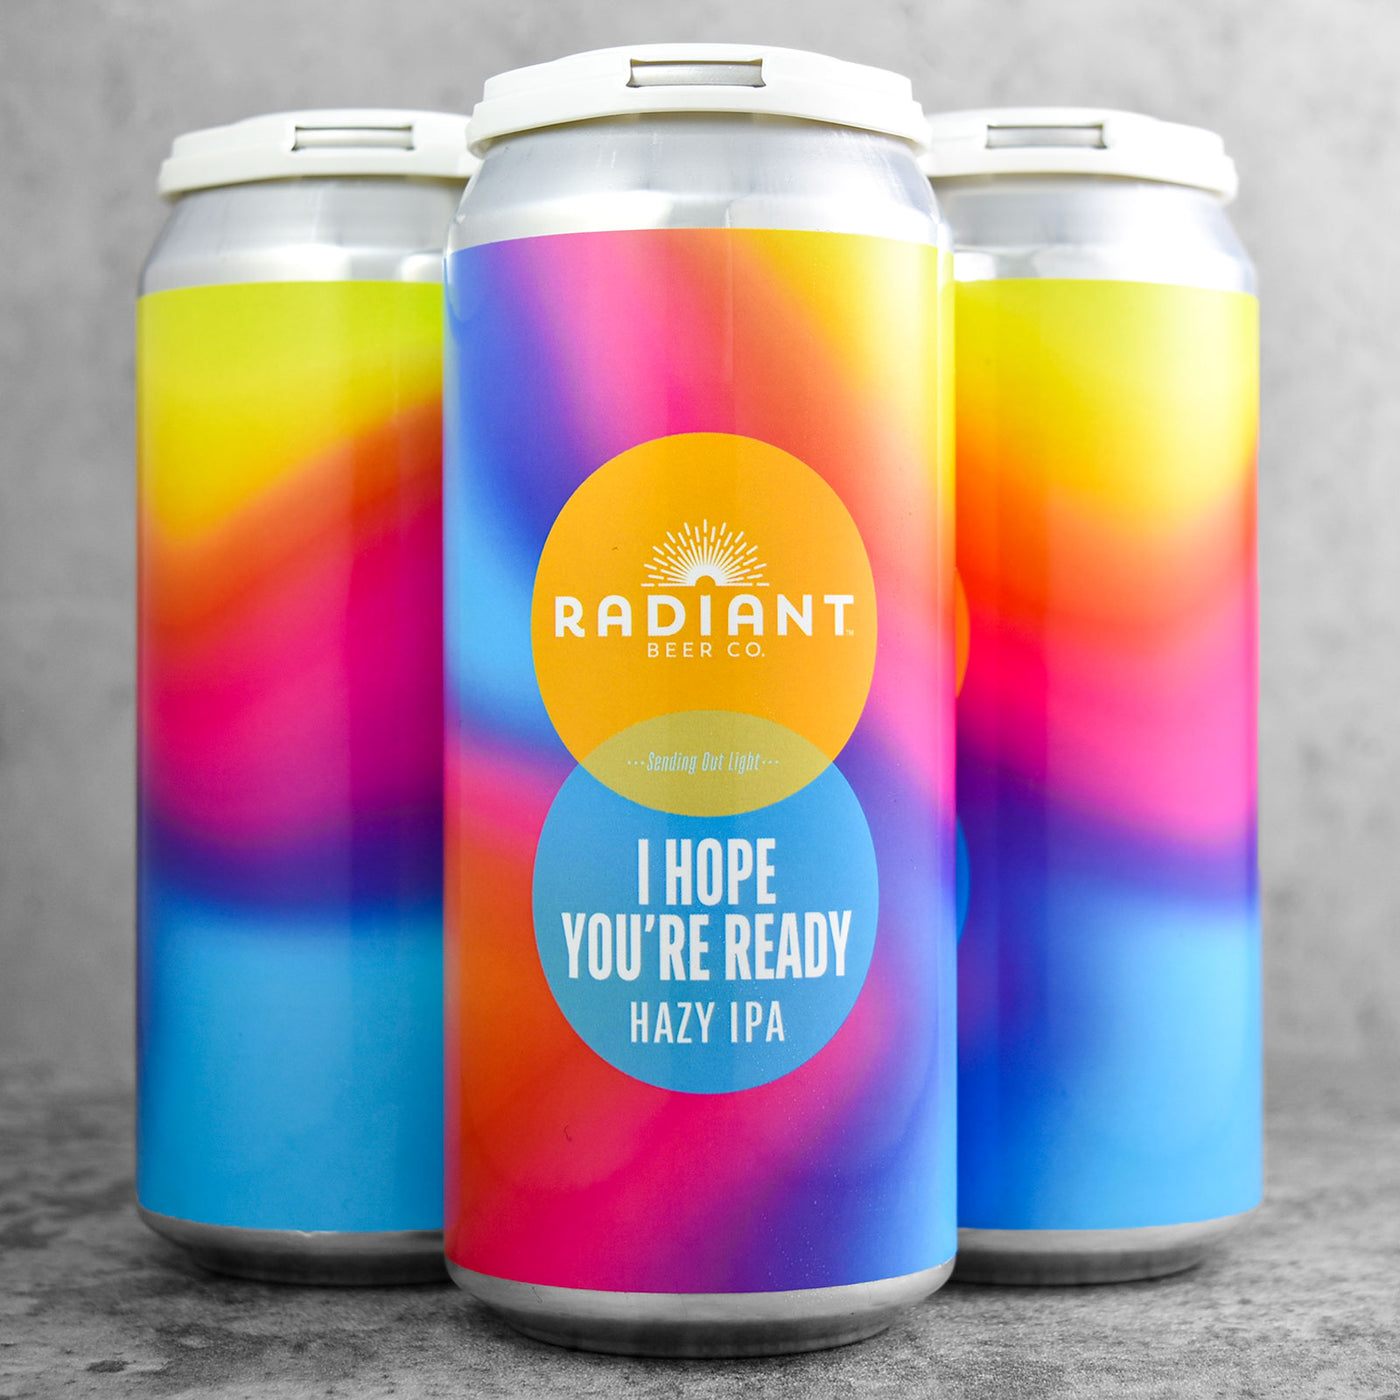 Radiant Beer Co. I Hope You're Ready